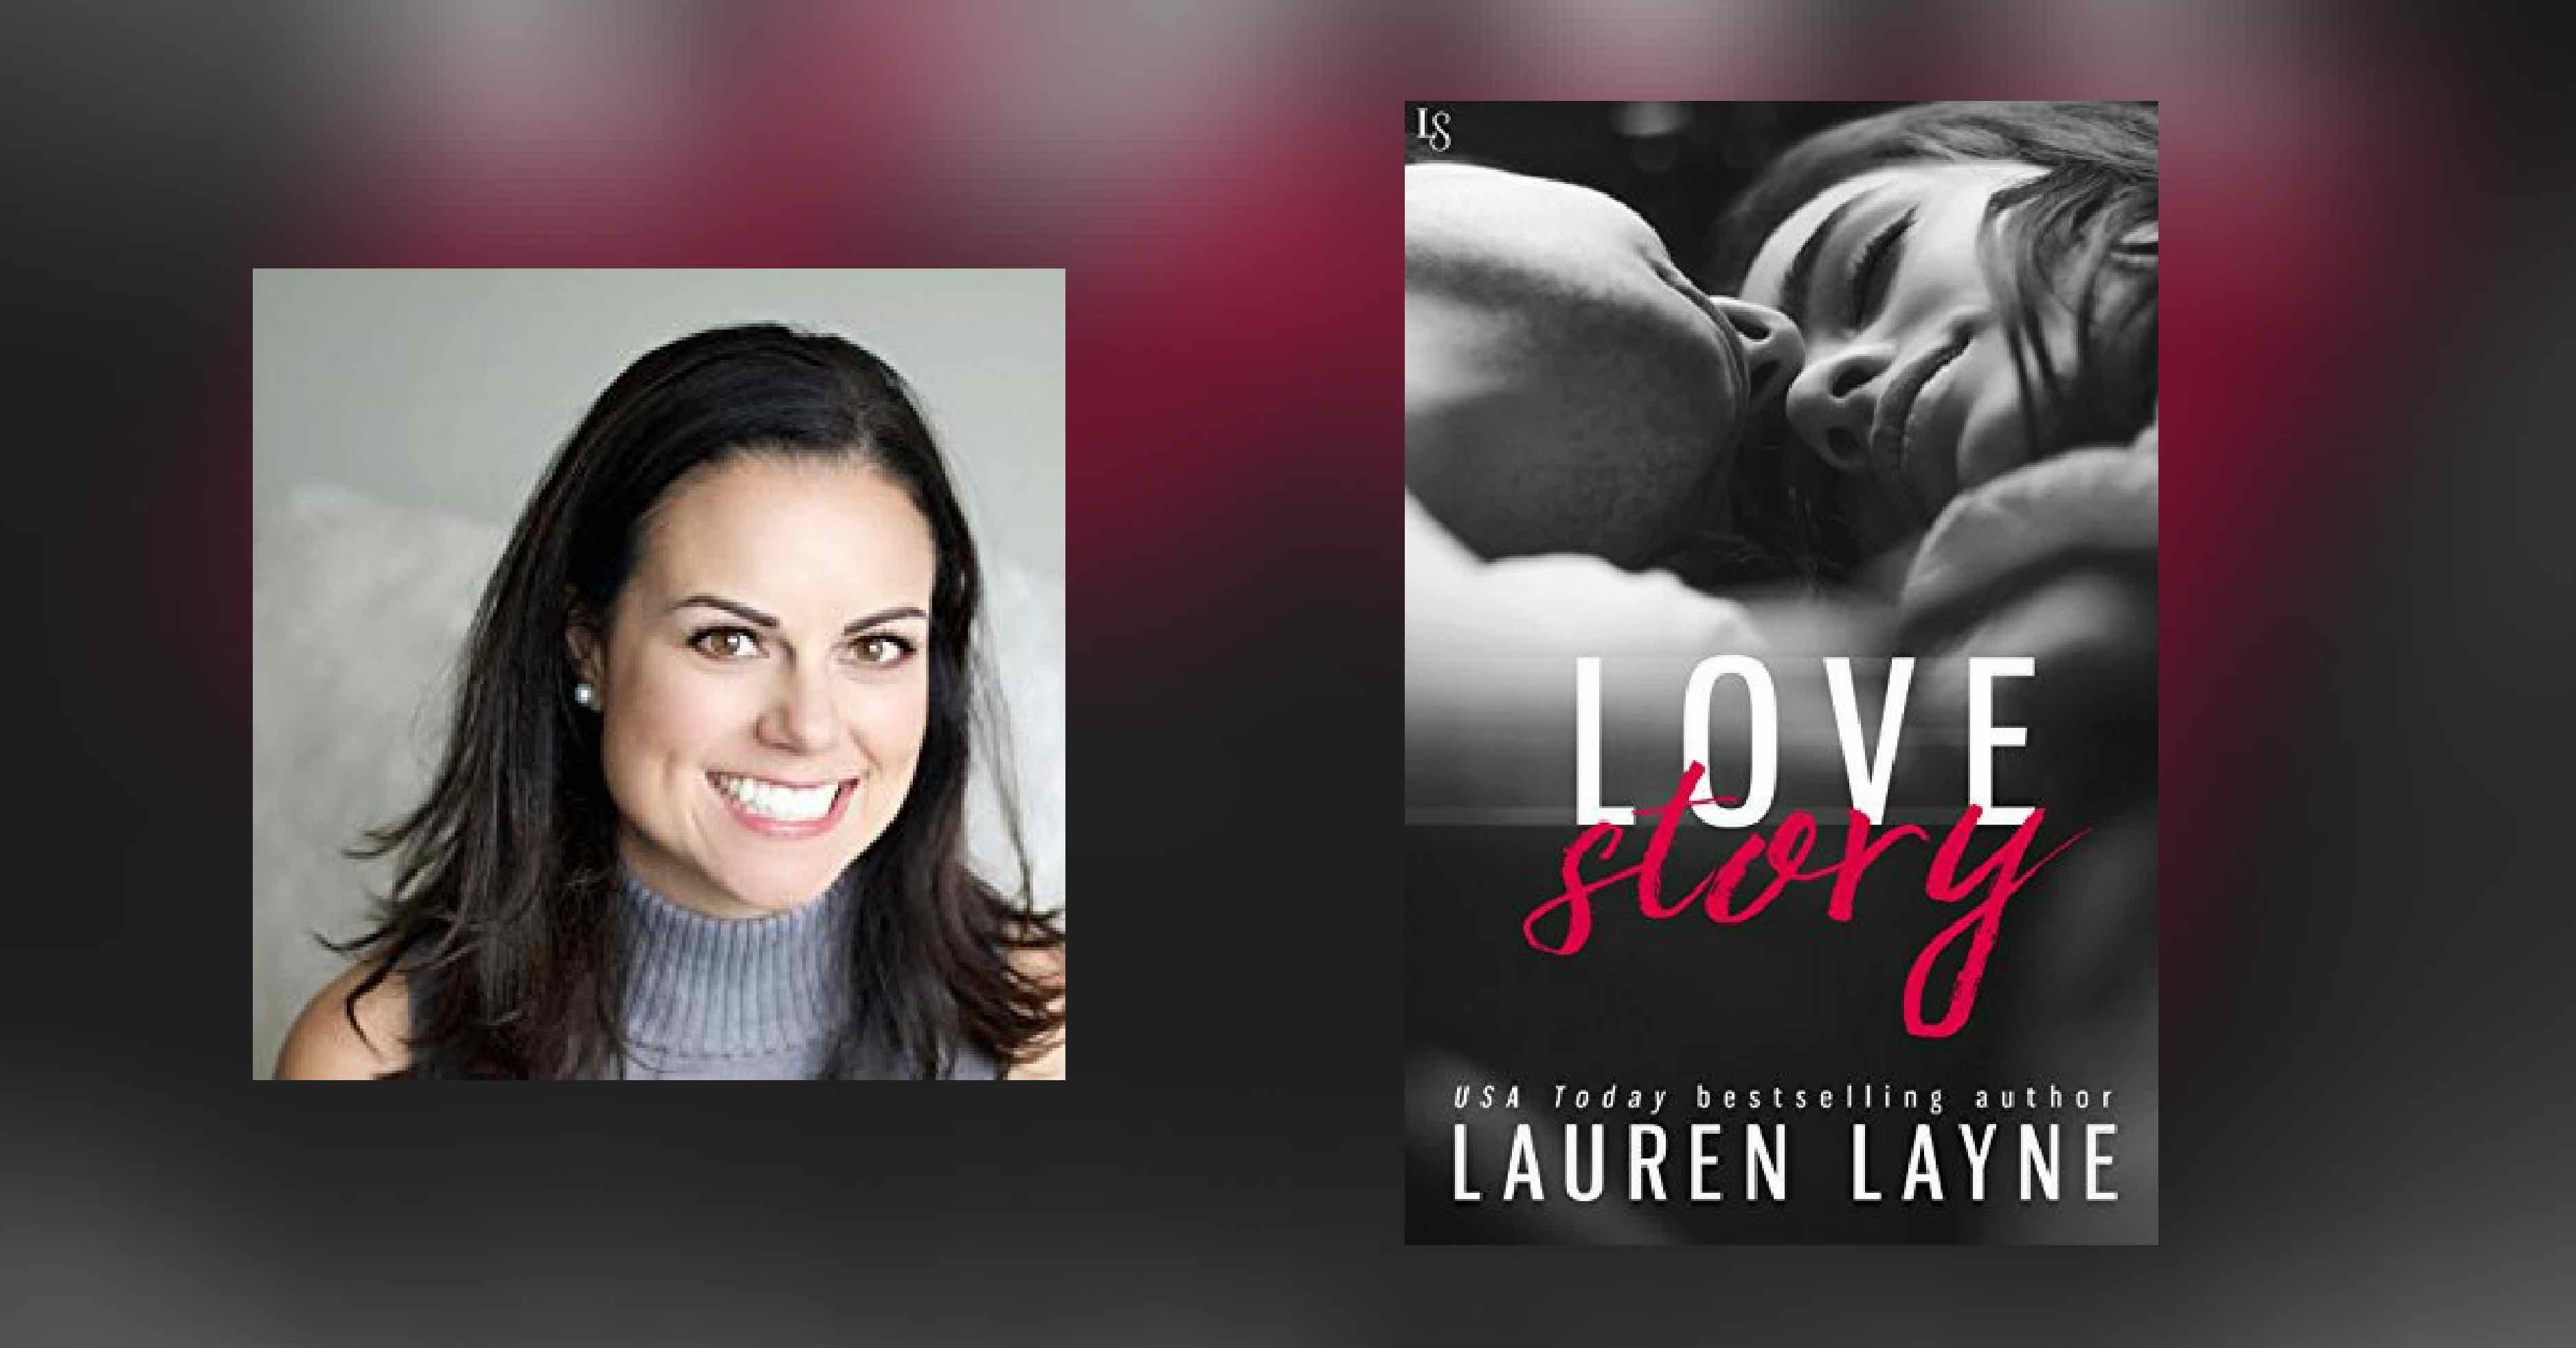 Interview with Lauren Layne, author of Love Story